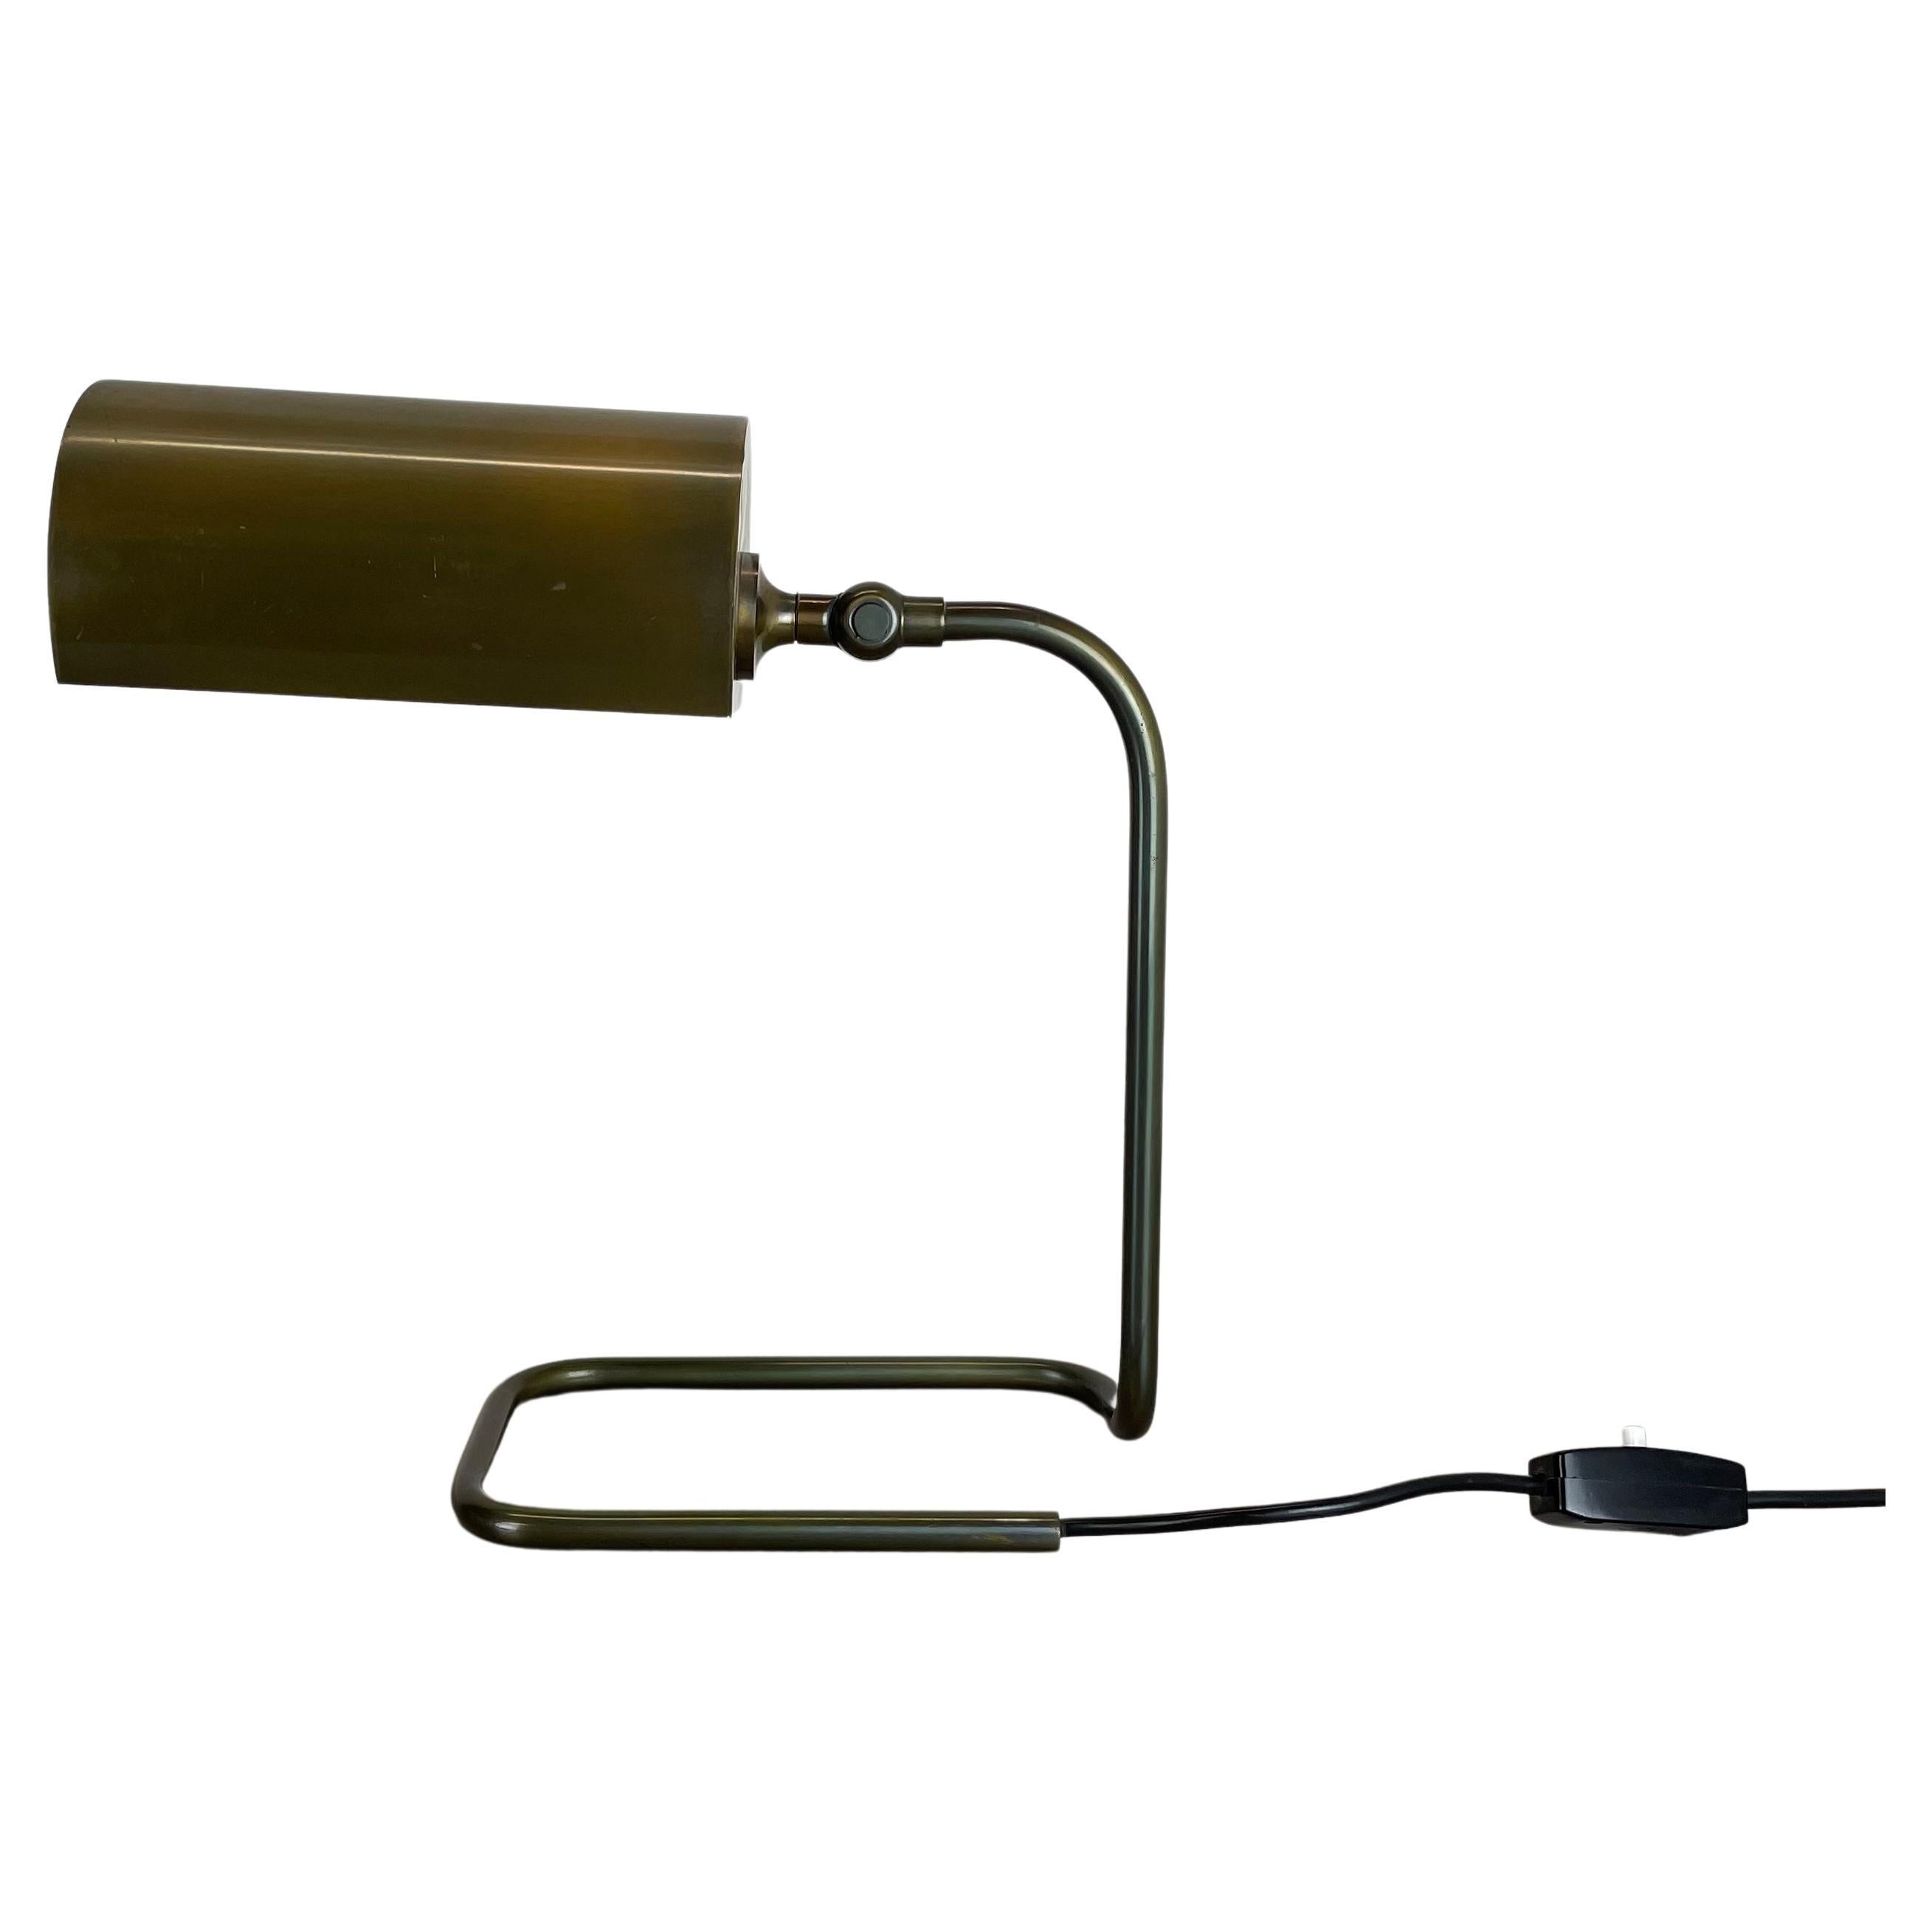 Beautiful Cubic Original Modernist Brass Metal Table Light, Germany, 1970s For Sale